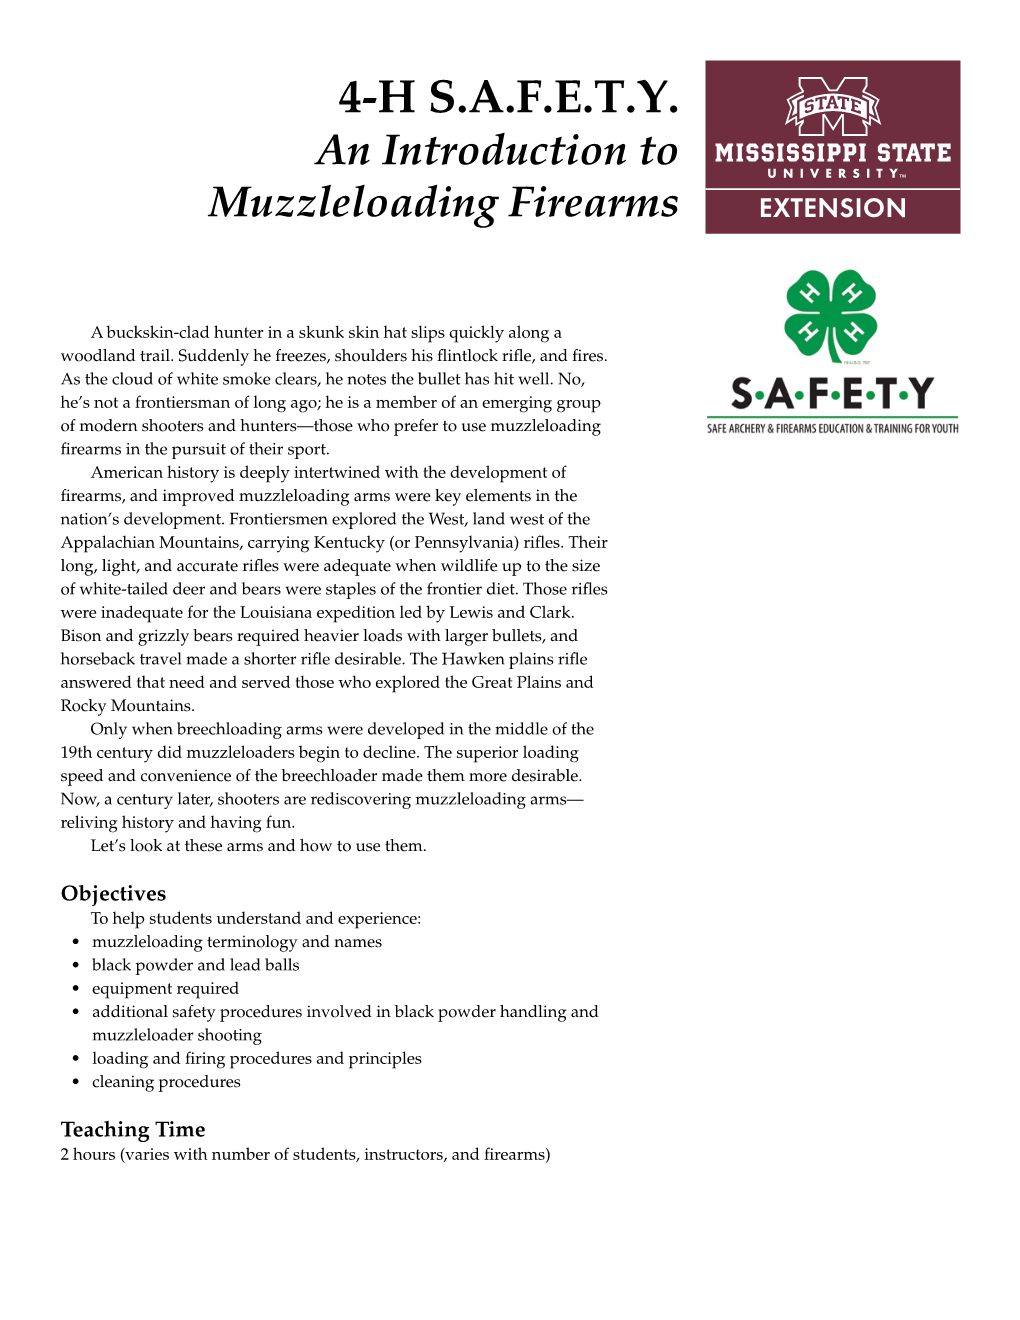 4-H S.A.F.E.T.Y. an Introduction to Muzzleloading Firearms